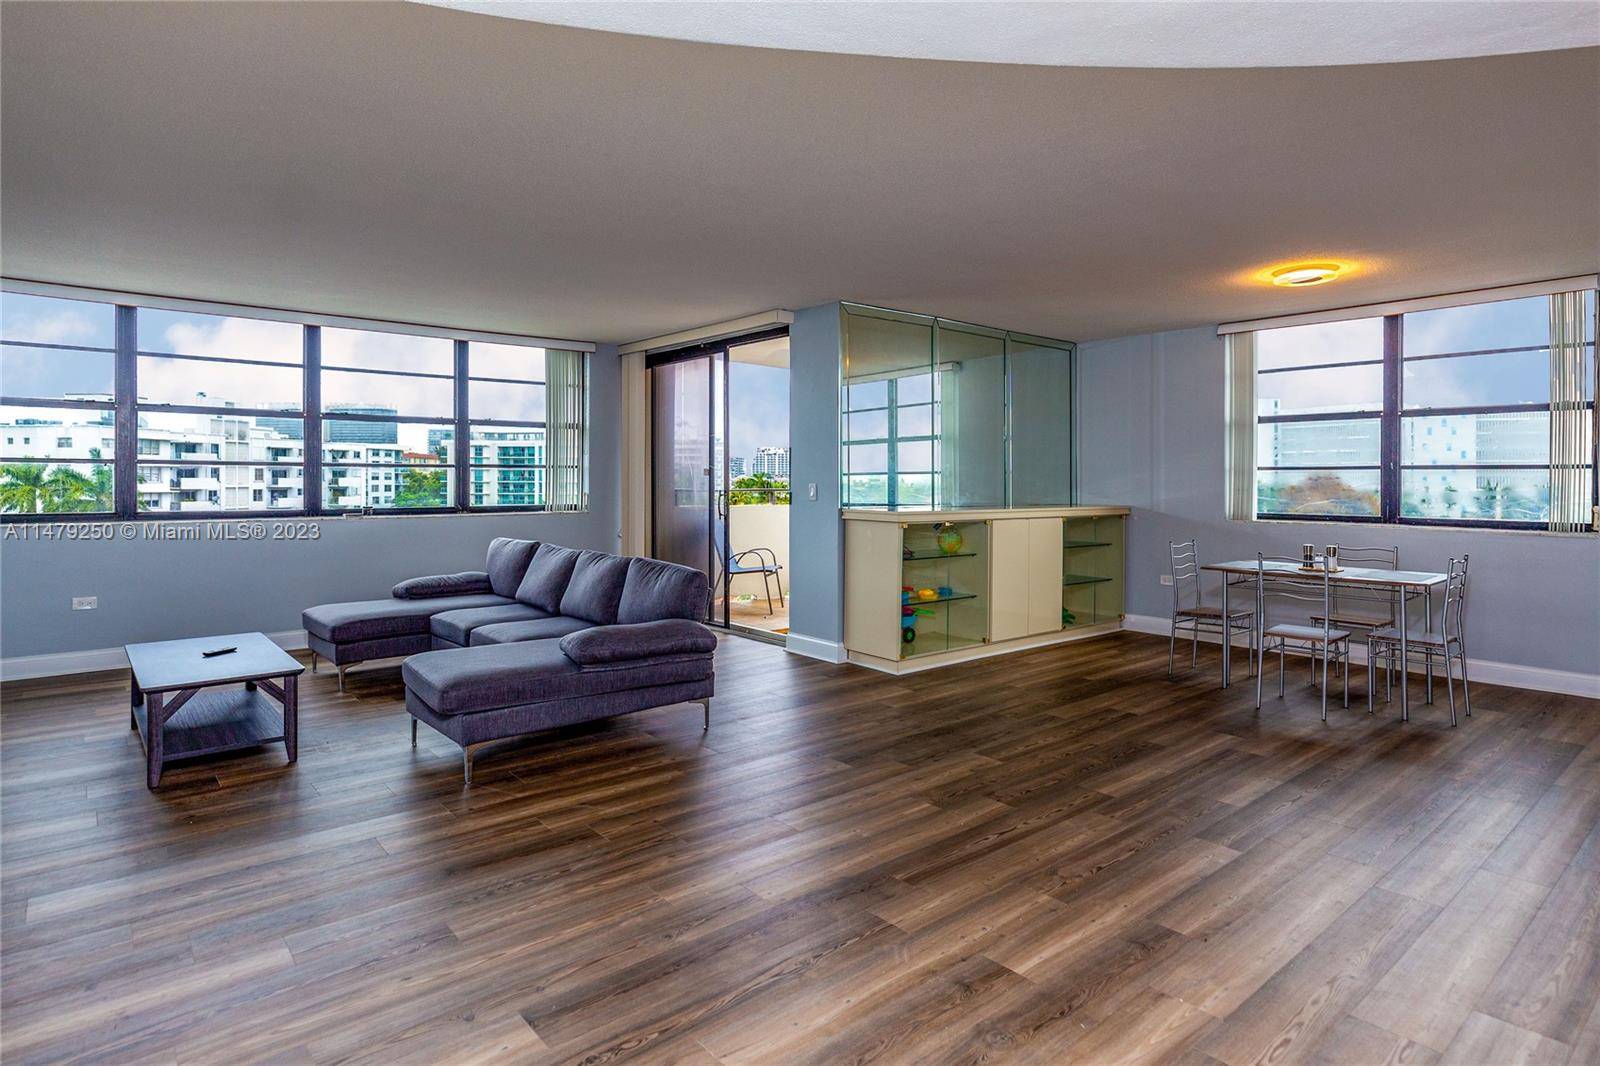 CASH ONLY Spectacular Waterfront Boutique Condo overlooking Bay Harbor Islands, Indian Creek golf course and the waterways.